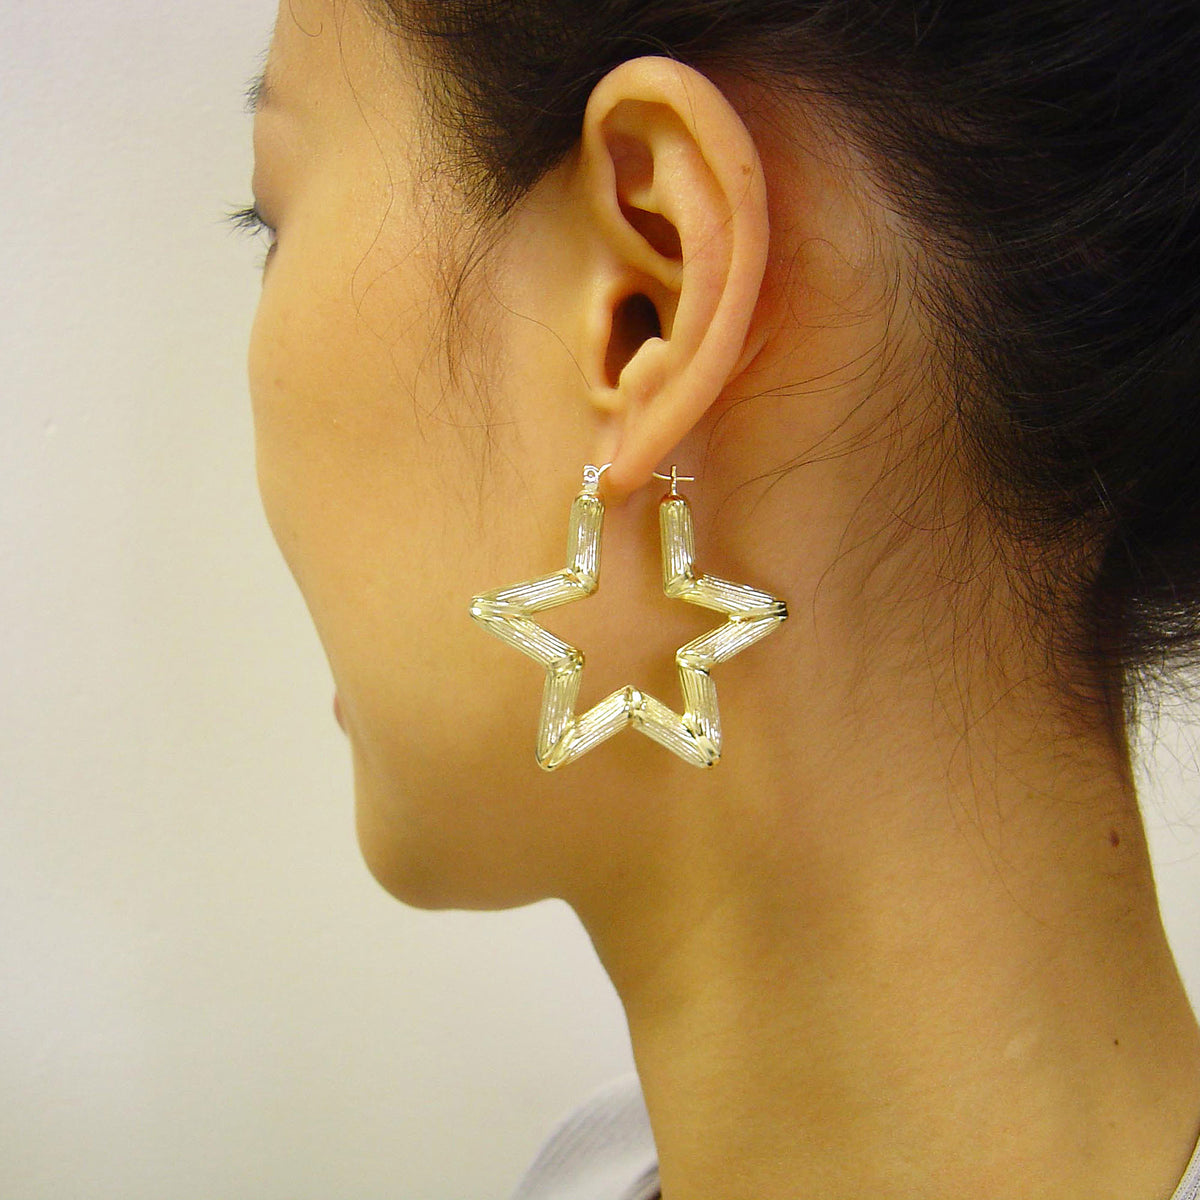 10K Real Gold Star hallow Bamboo Earrings Fine Jewelry 1.75 Inches.